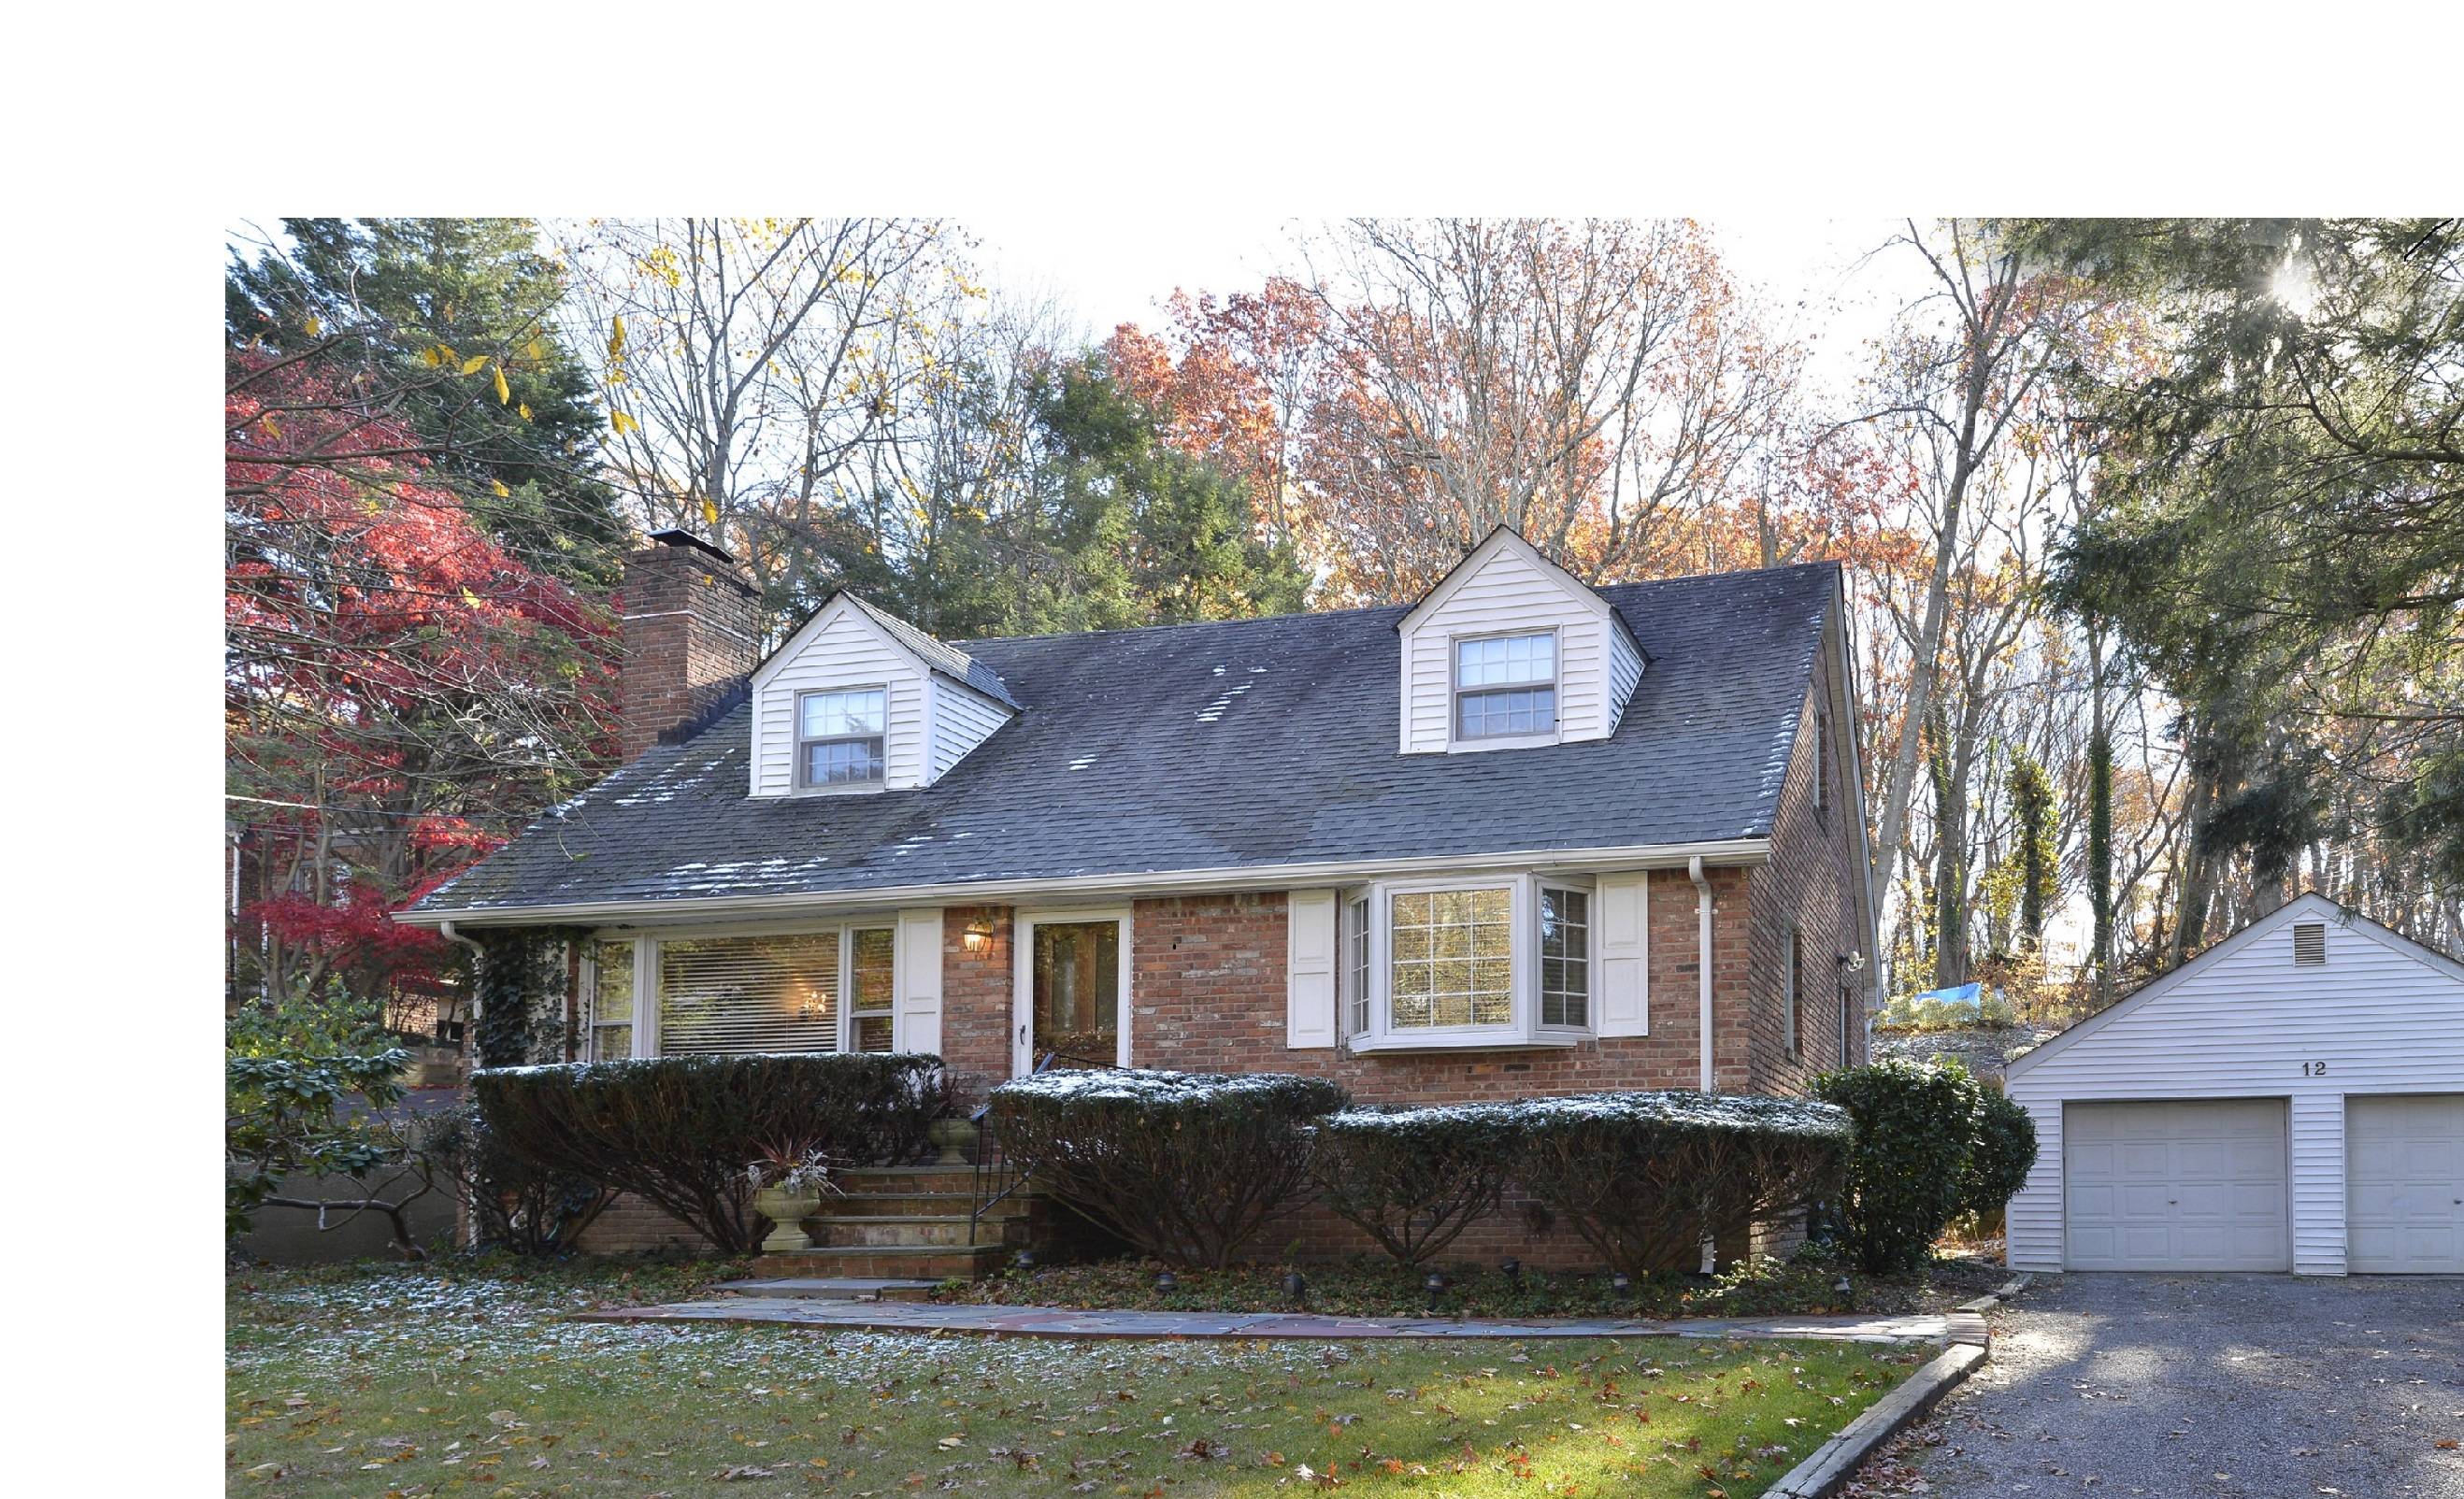 Charming, Bright, Solid Brick 3 Bedroom Cape in Woodbury